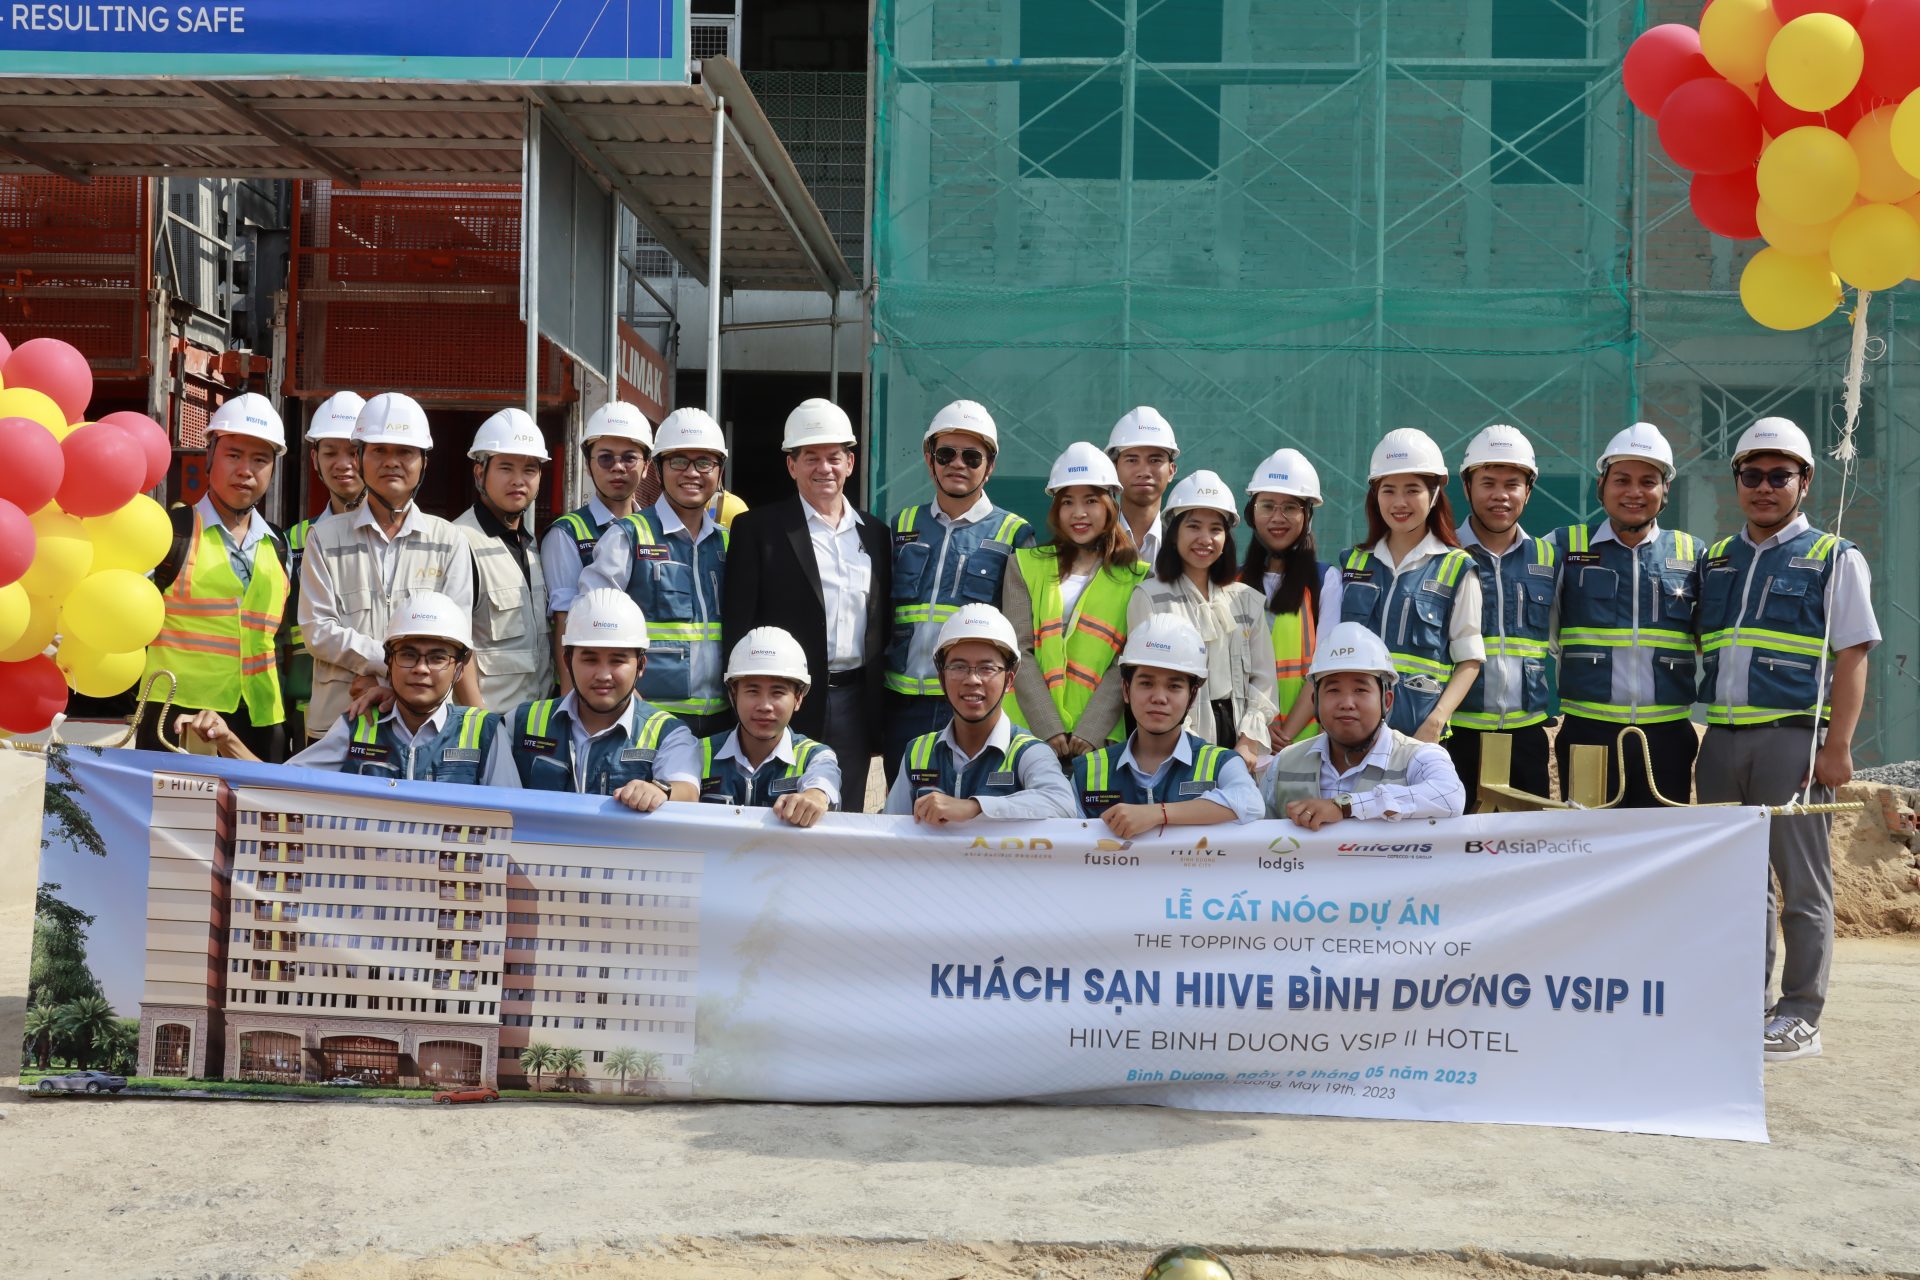 Pictures at the ceremony of the tower of HIIVE BINH DUONG VSIP II project